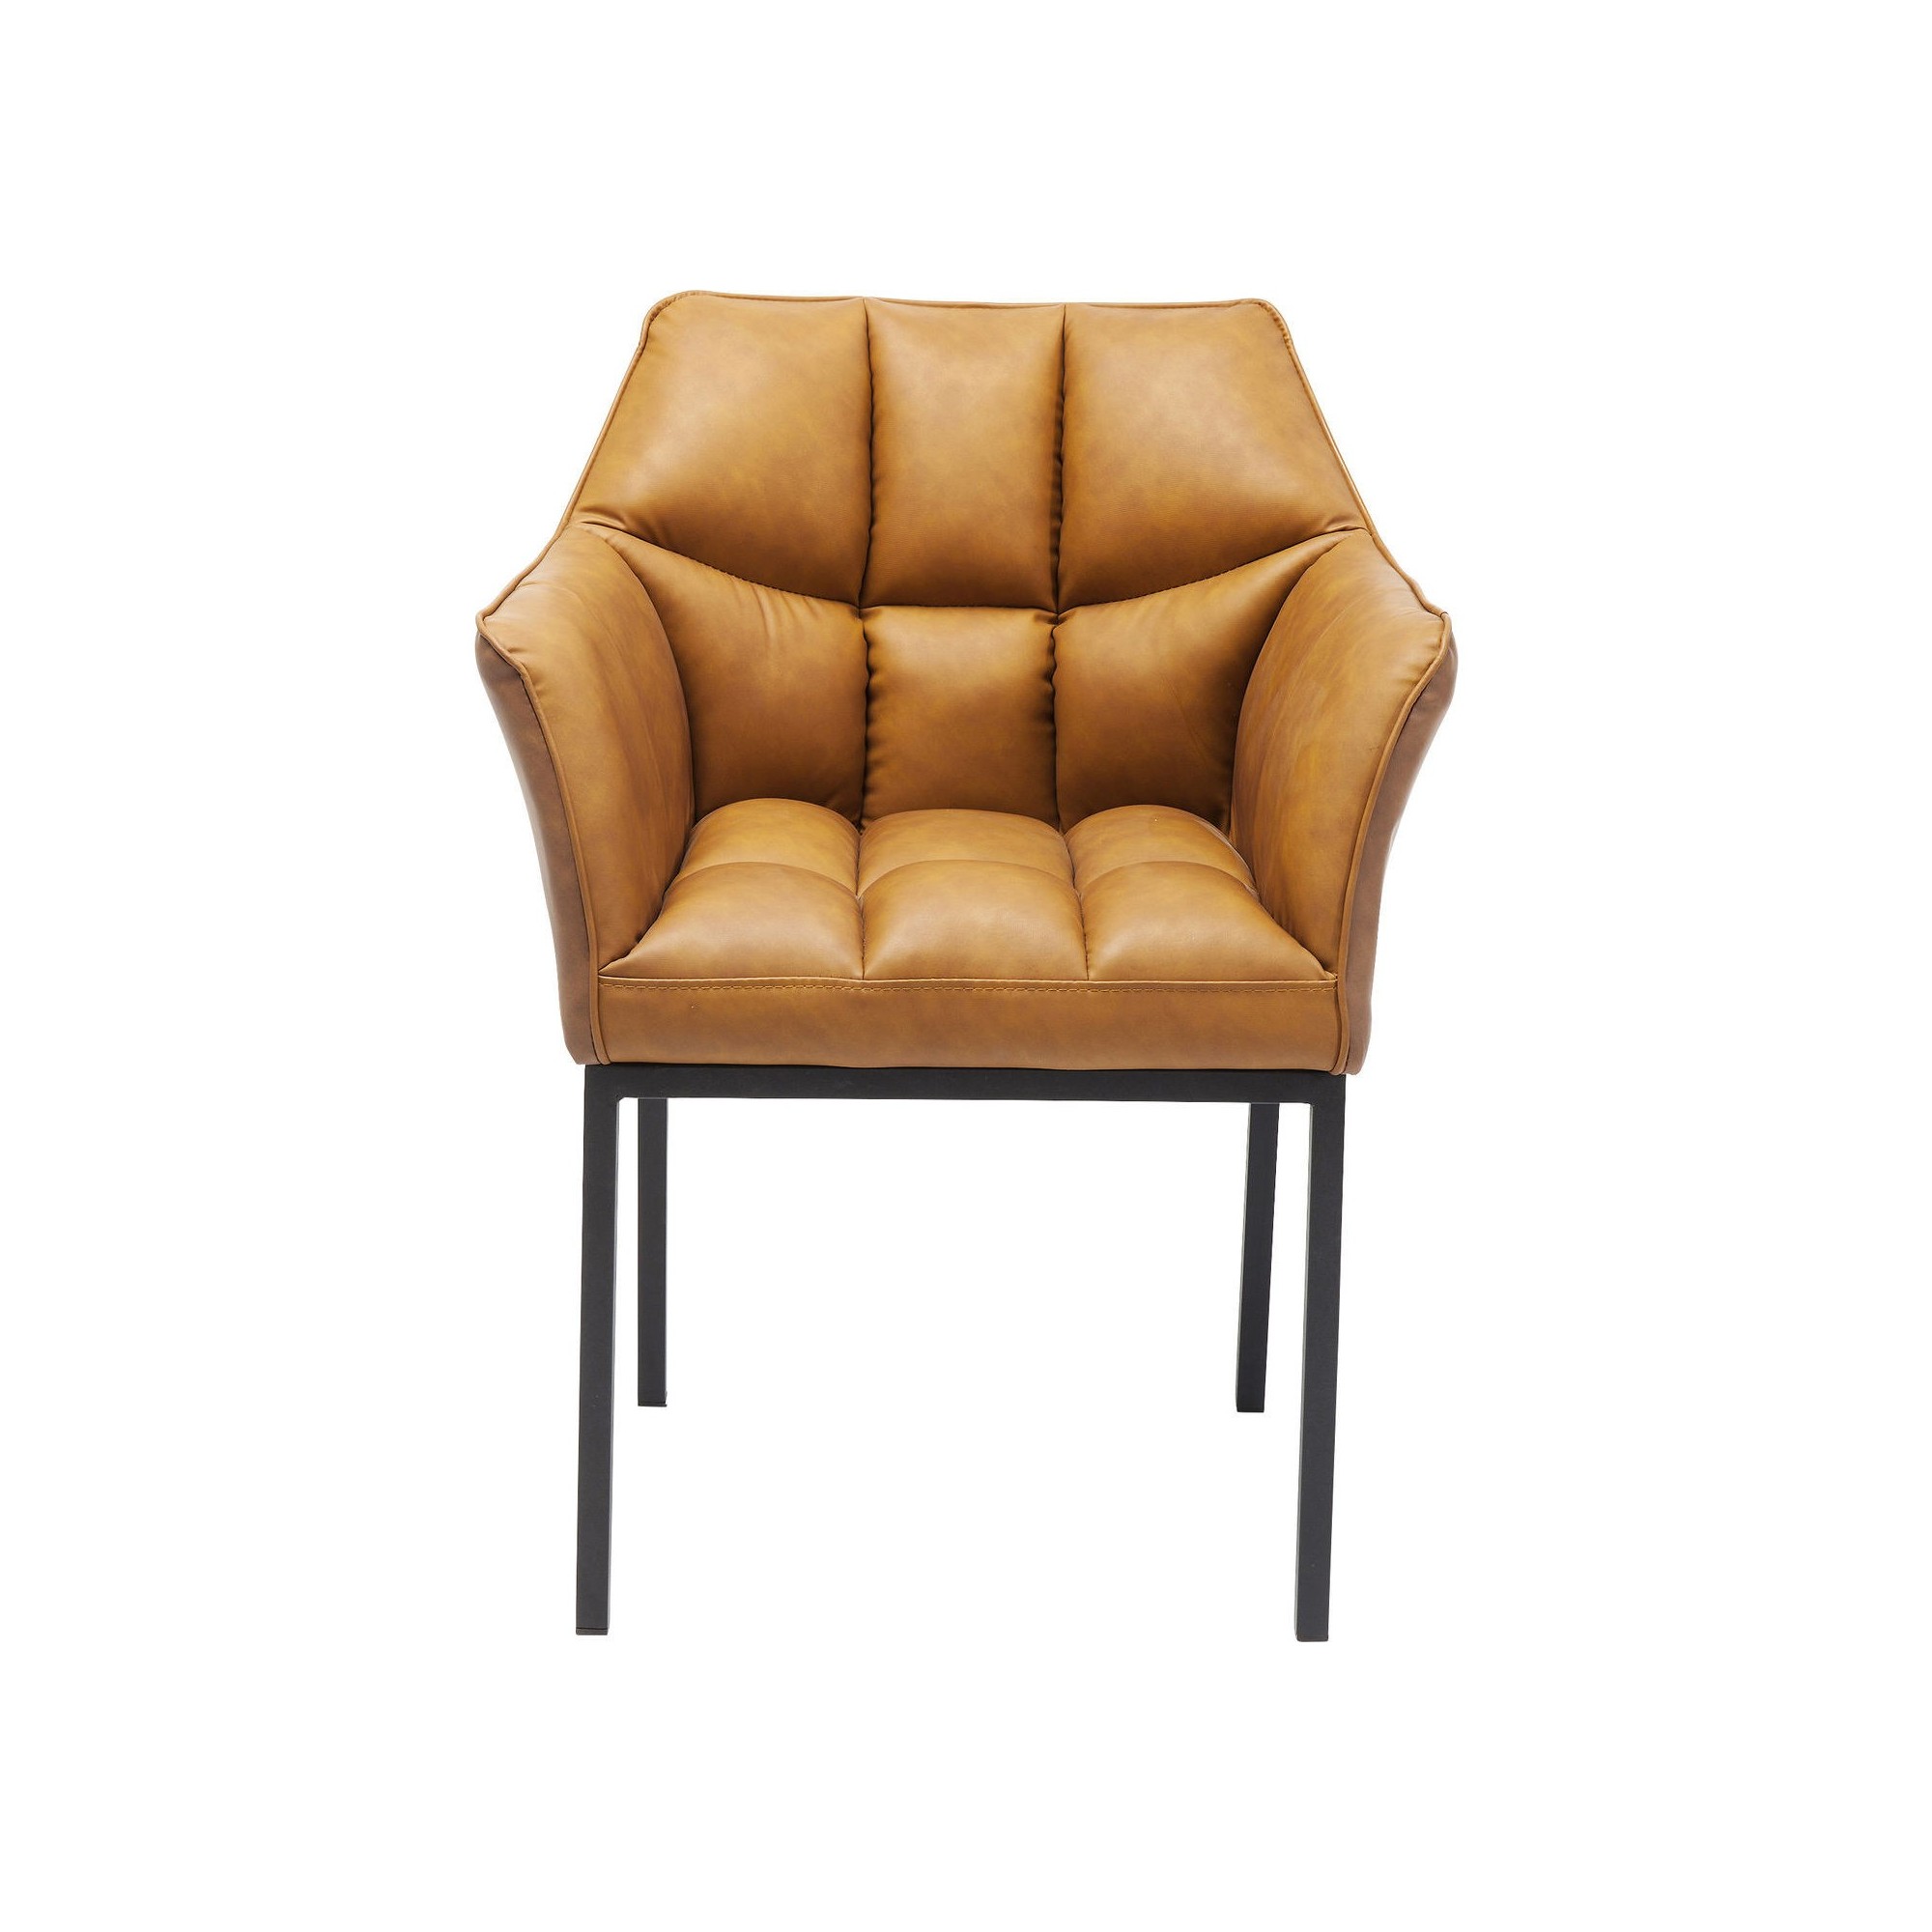 Chair with Armrest Thinktank Brown Kare Design